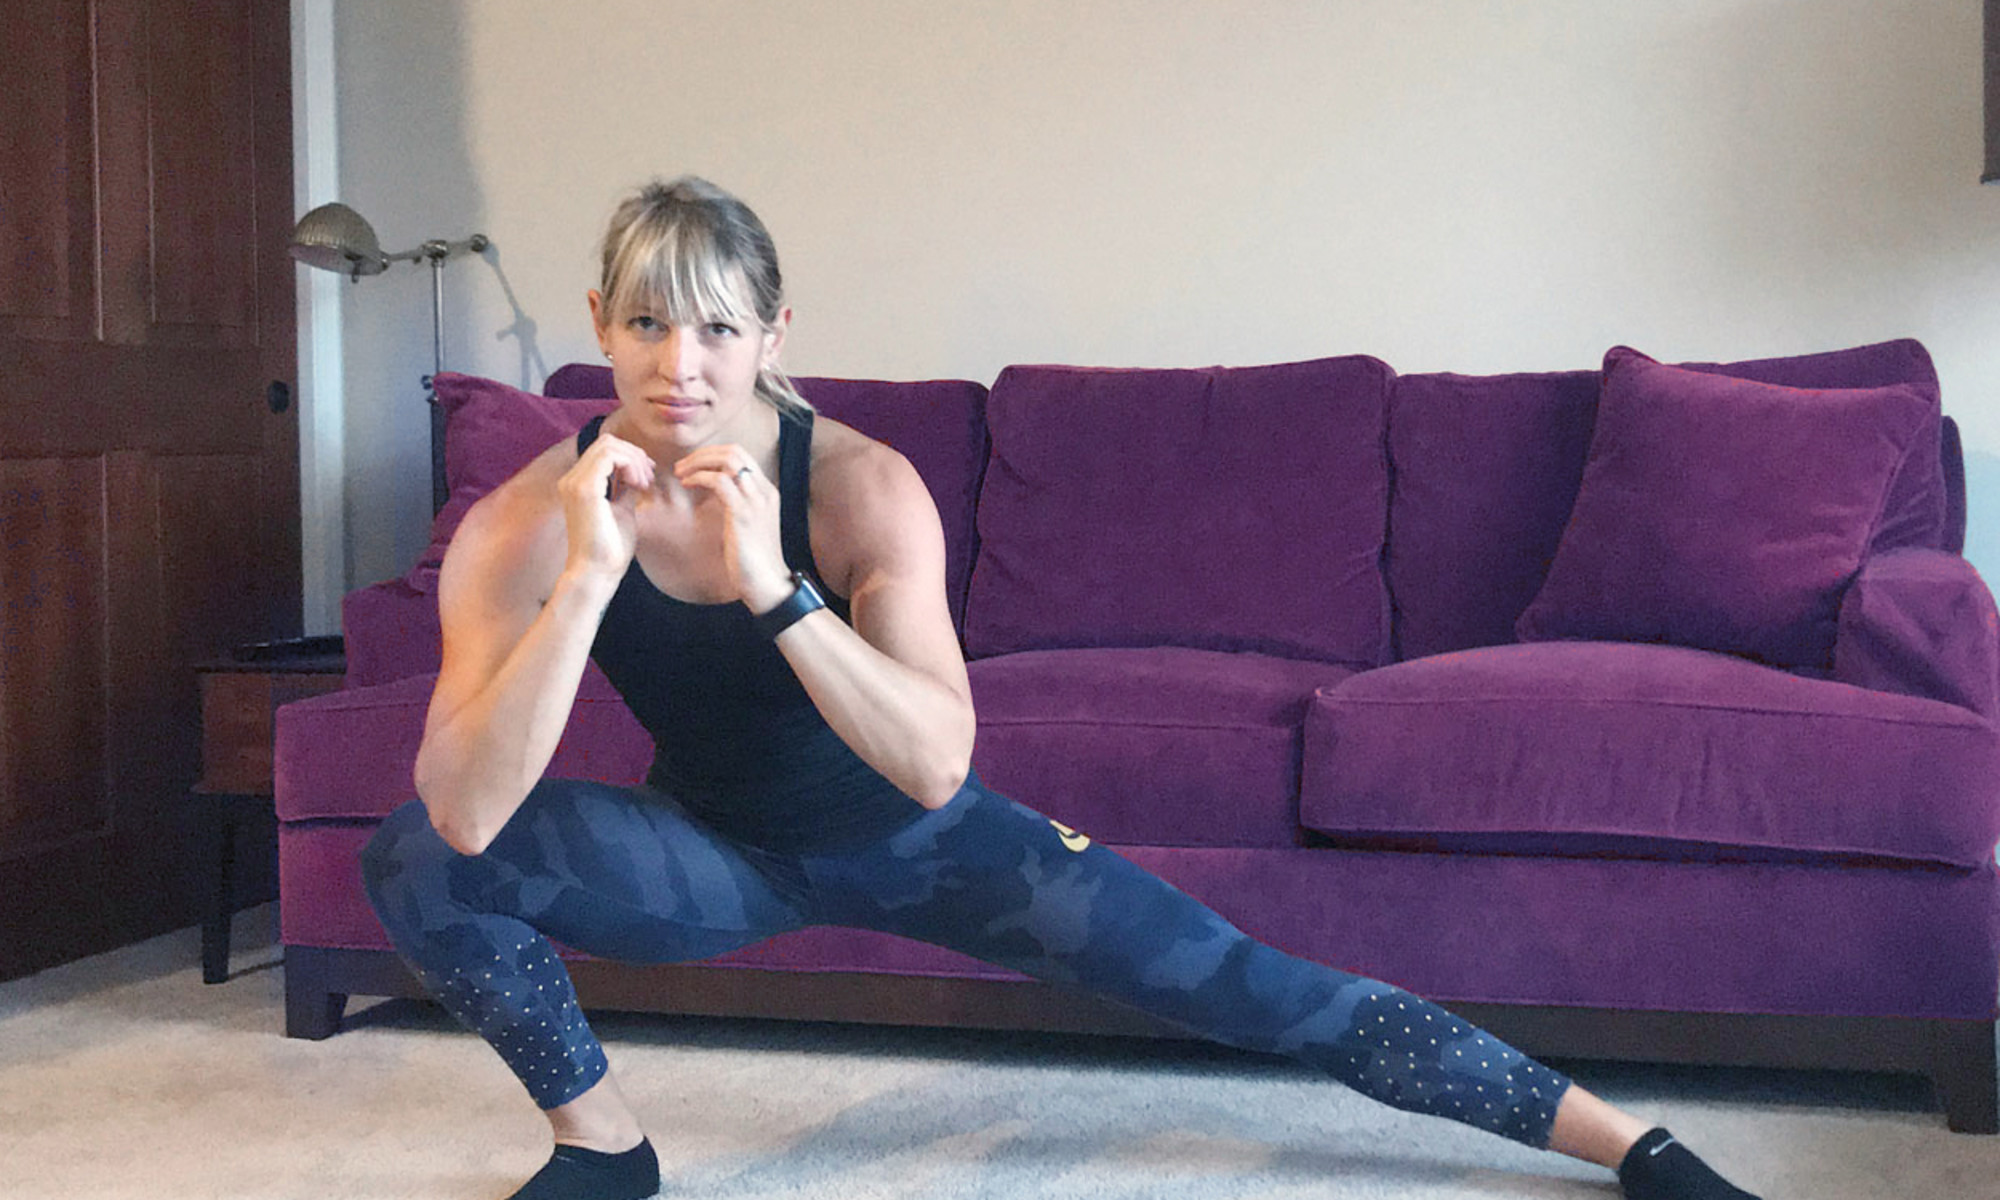 Here's A 12-Minute HIIT Workout You Can Do In Your Apartment